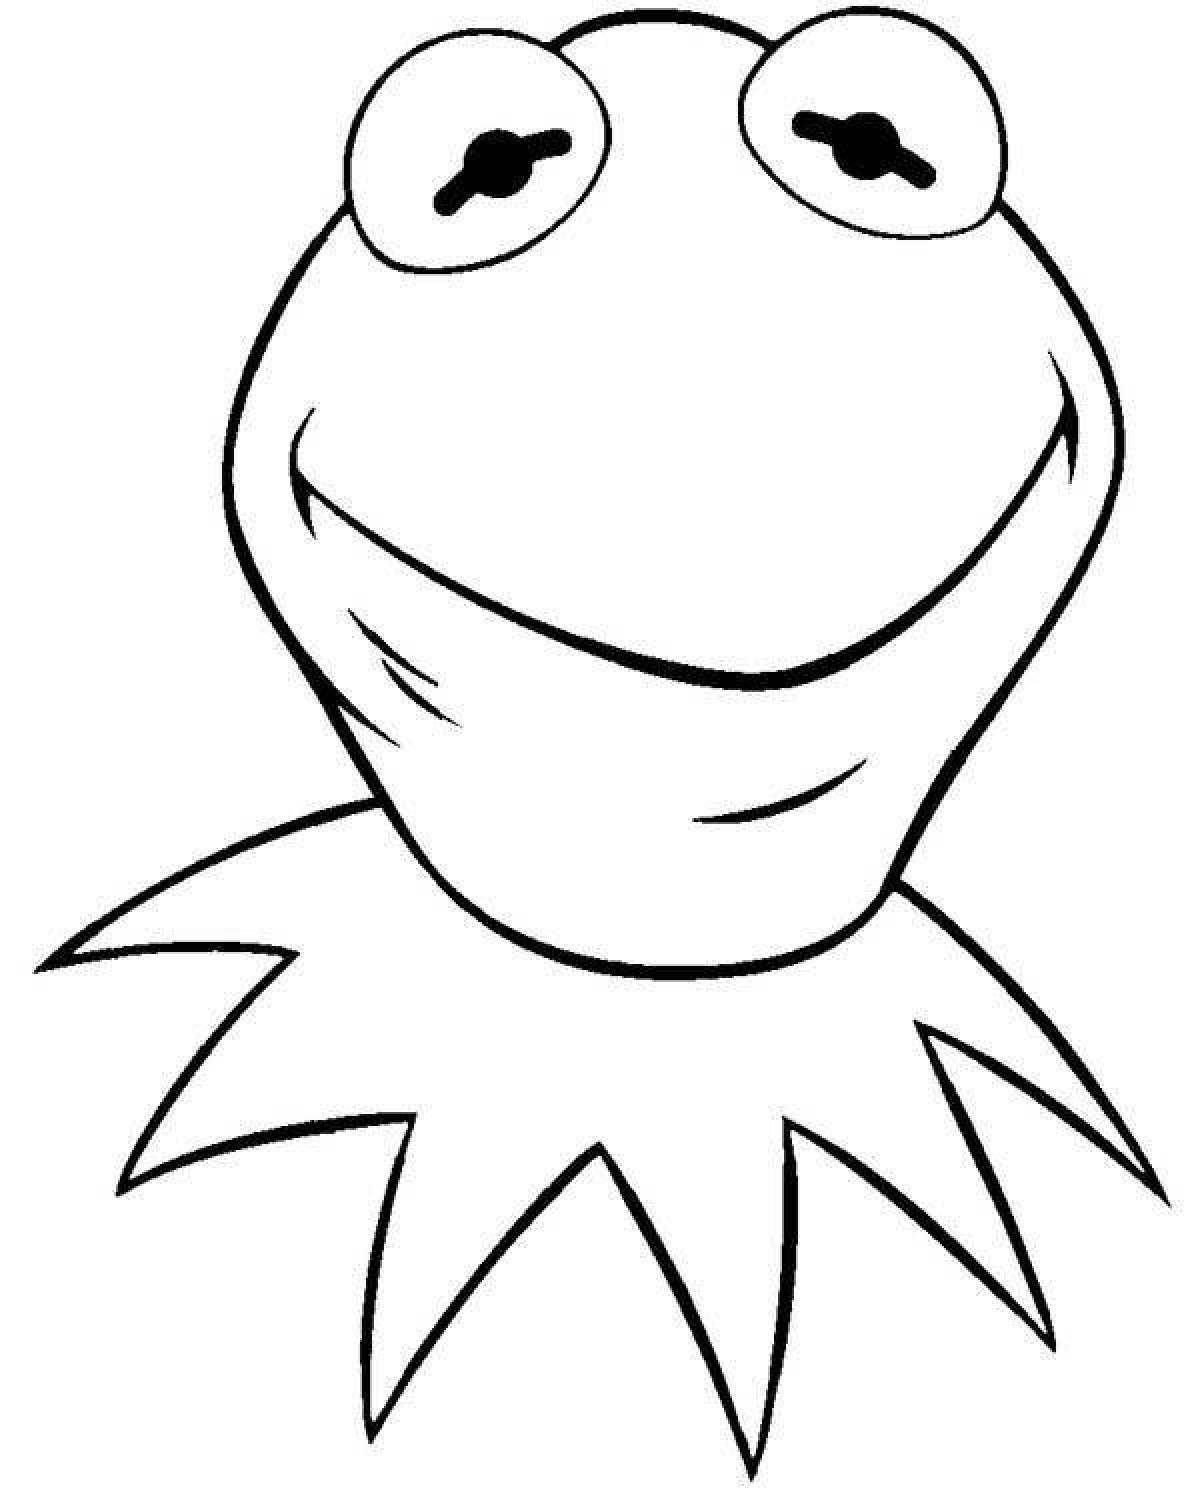 Exciting tik tok frog coloring page